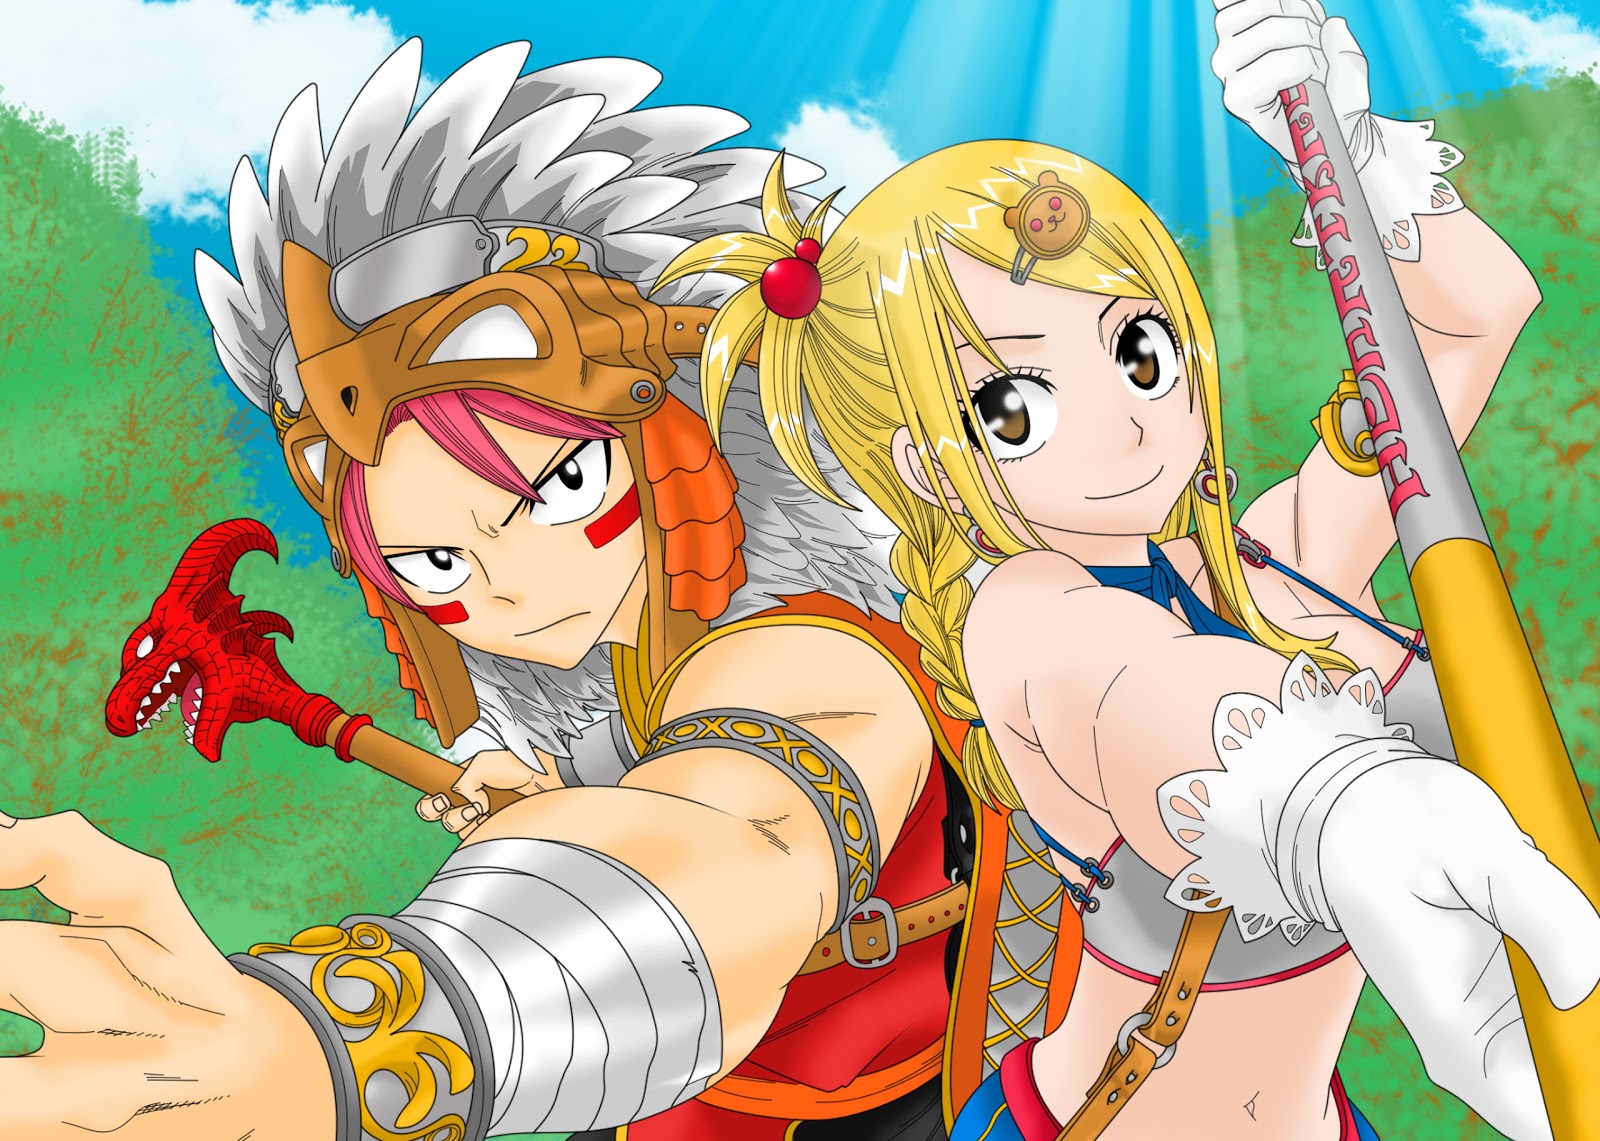 Fairy Tail Wallpaper 1600x1140 Your daily Anime Wallpaper and Fan